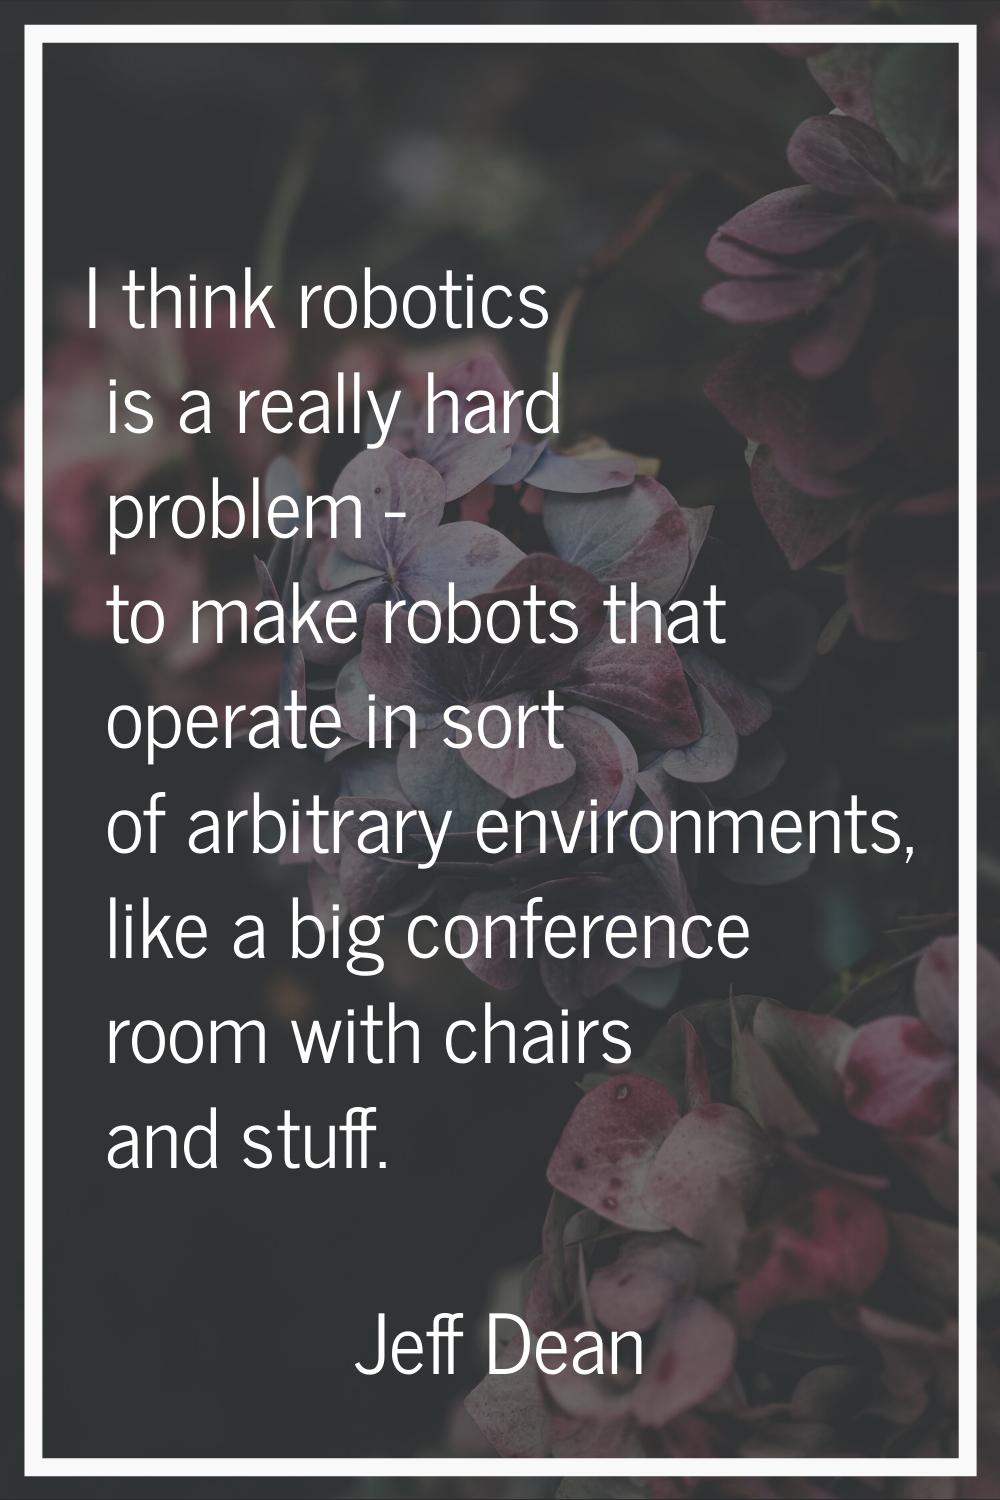 I think robotics is a really hard problem - to make robots that operate in sort of arbitrary enviro